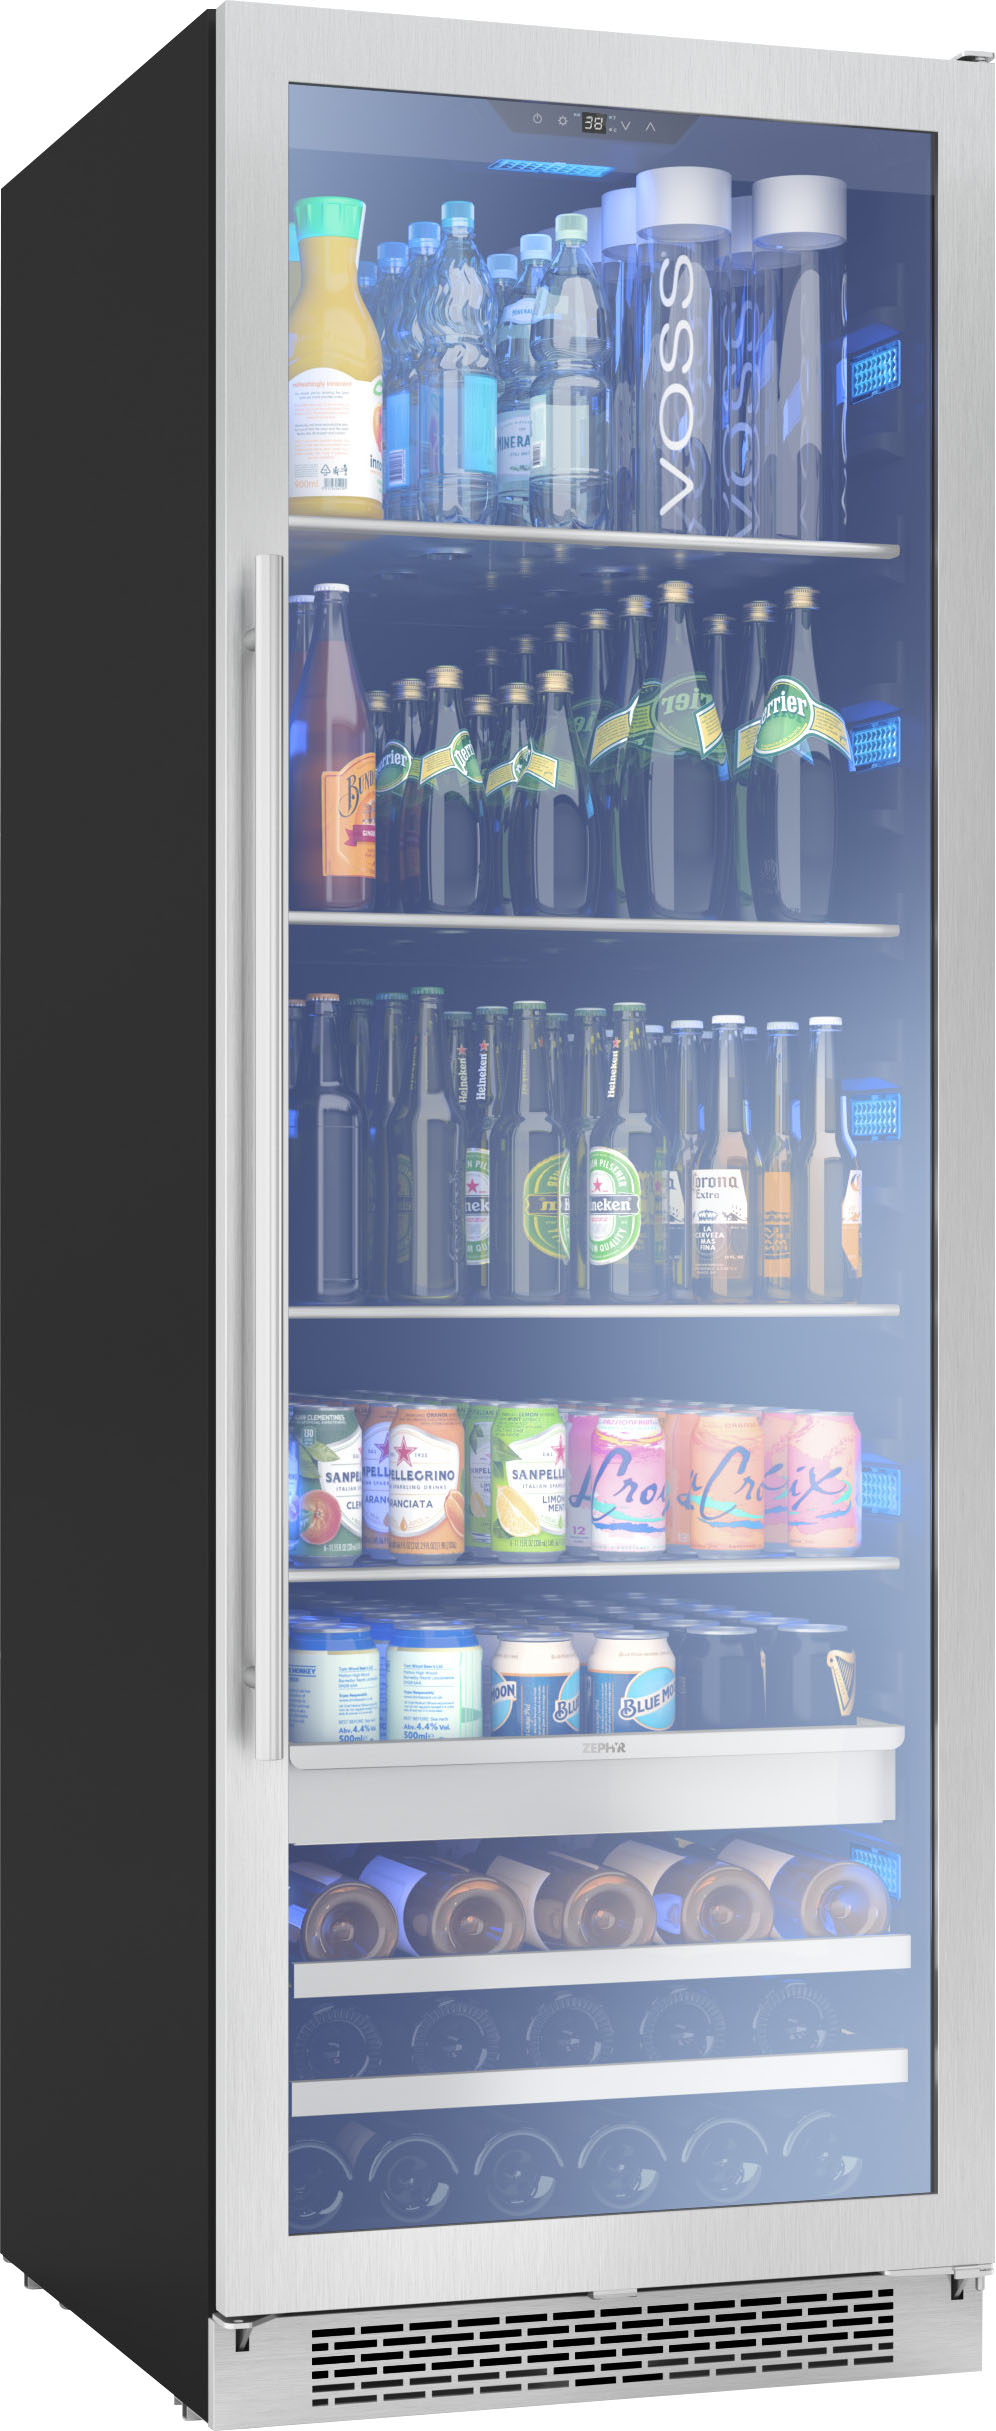 Left View: Zephyr - Presrv 15 in. 4-Bottle and 64-Can Single Zone Beverage Cooler - Stainless steel and glass